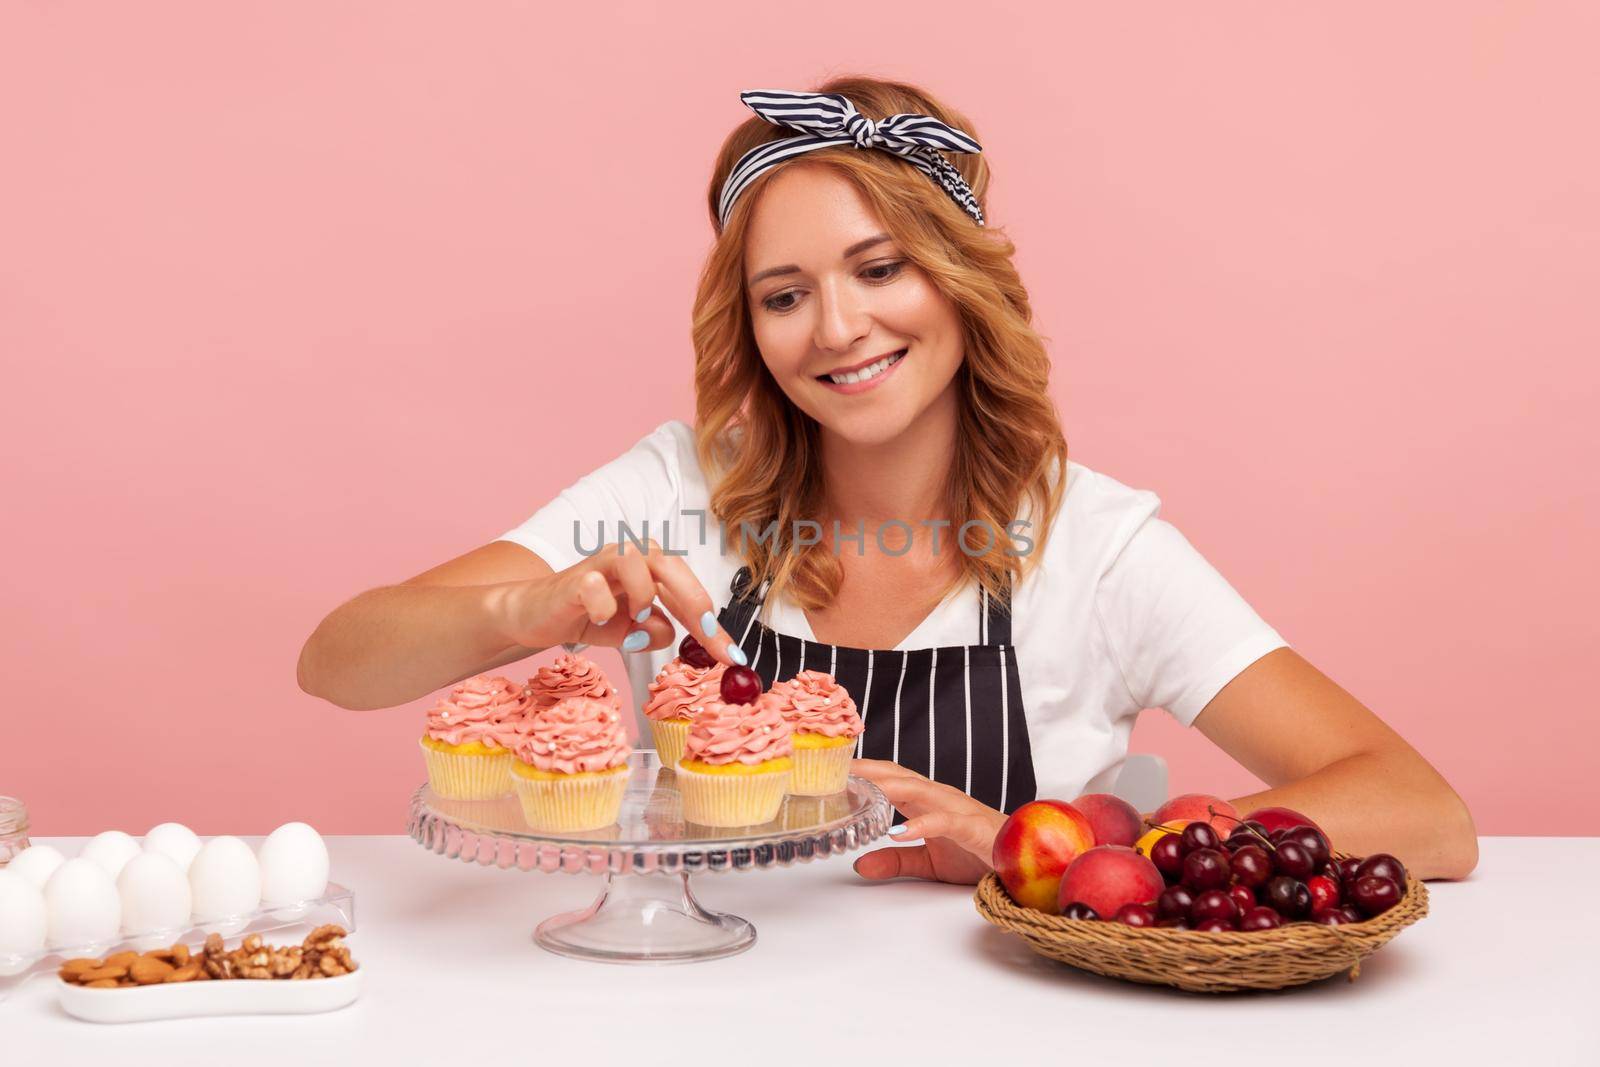 Decoration of finished dessert. Pastry chef sprinkles confectionery homemade pastry with fresh cherry, cooking cakes, wearing T-shirt and apron. Indoor studio shot isolated on pink background.